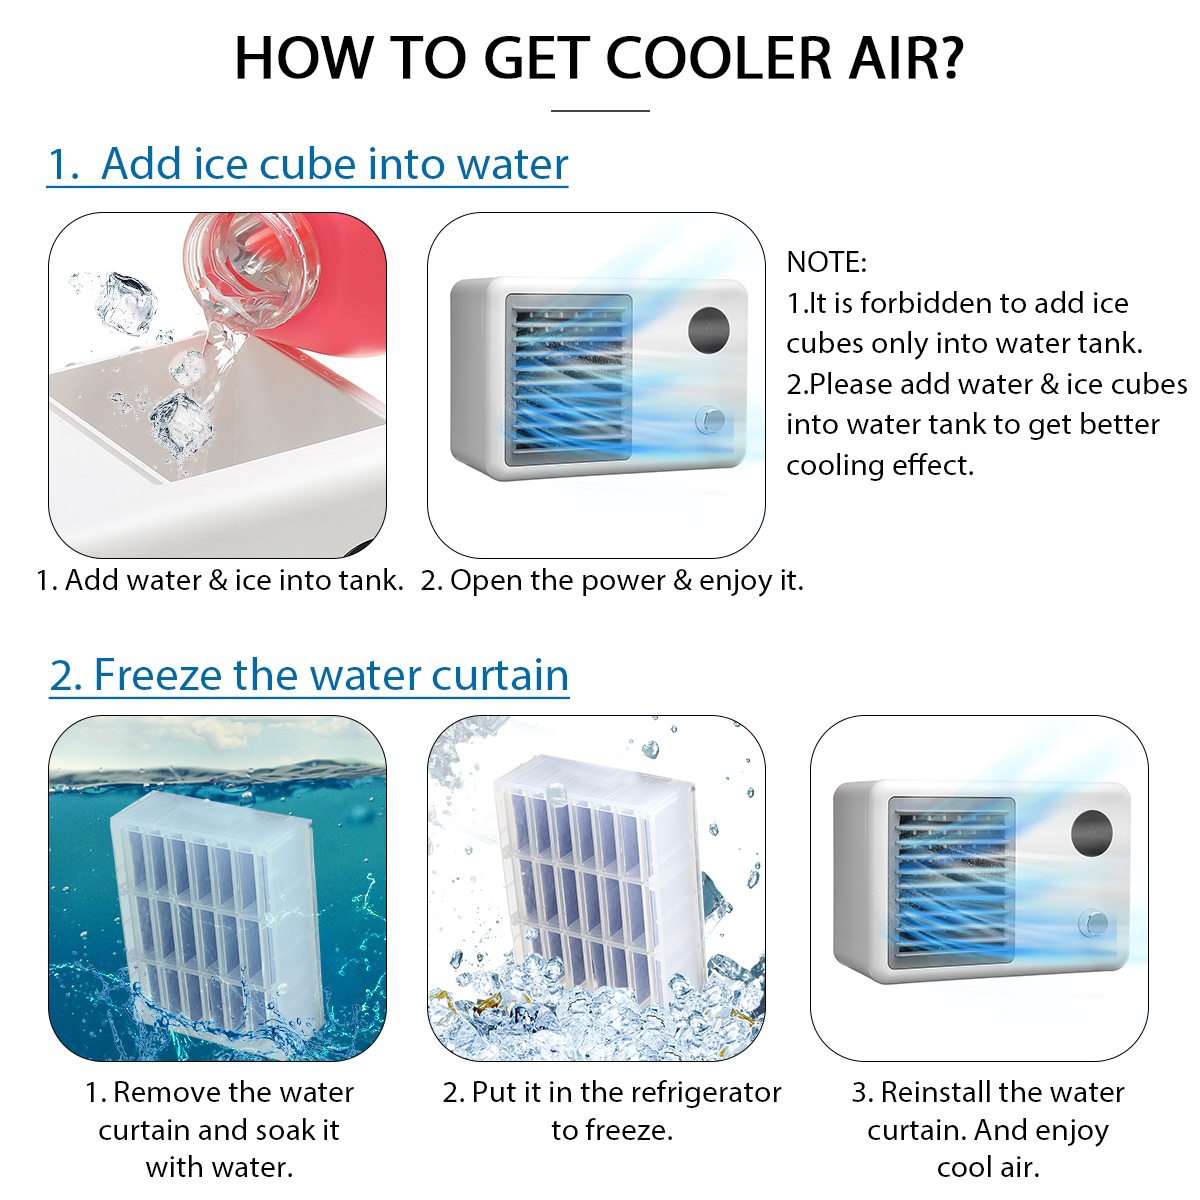 400ml-Air-Conditioner-3-Speed-7-Color-Light-2000mAh-Mini-USB-Air-Fan-Water-cooled-Spray-Fan-1836378-13